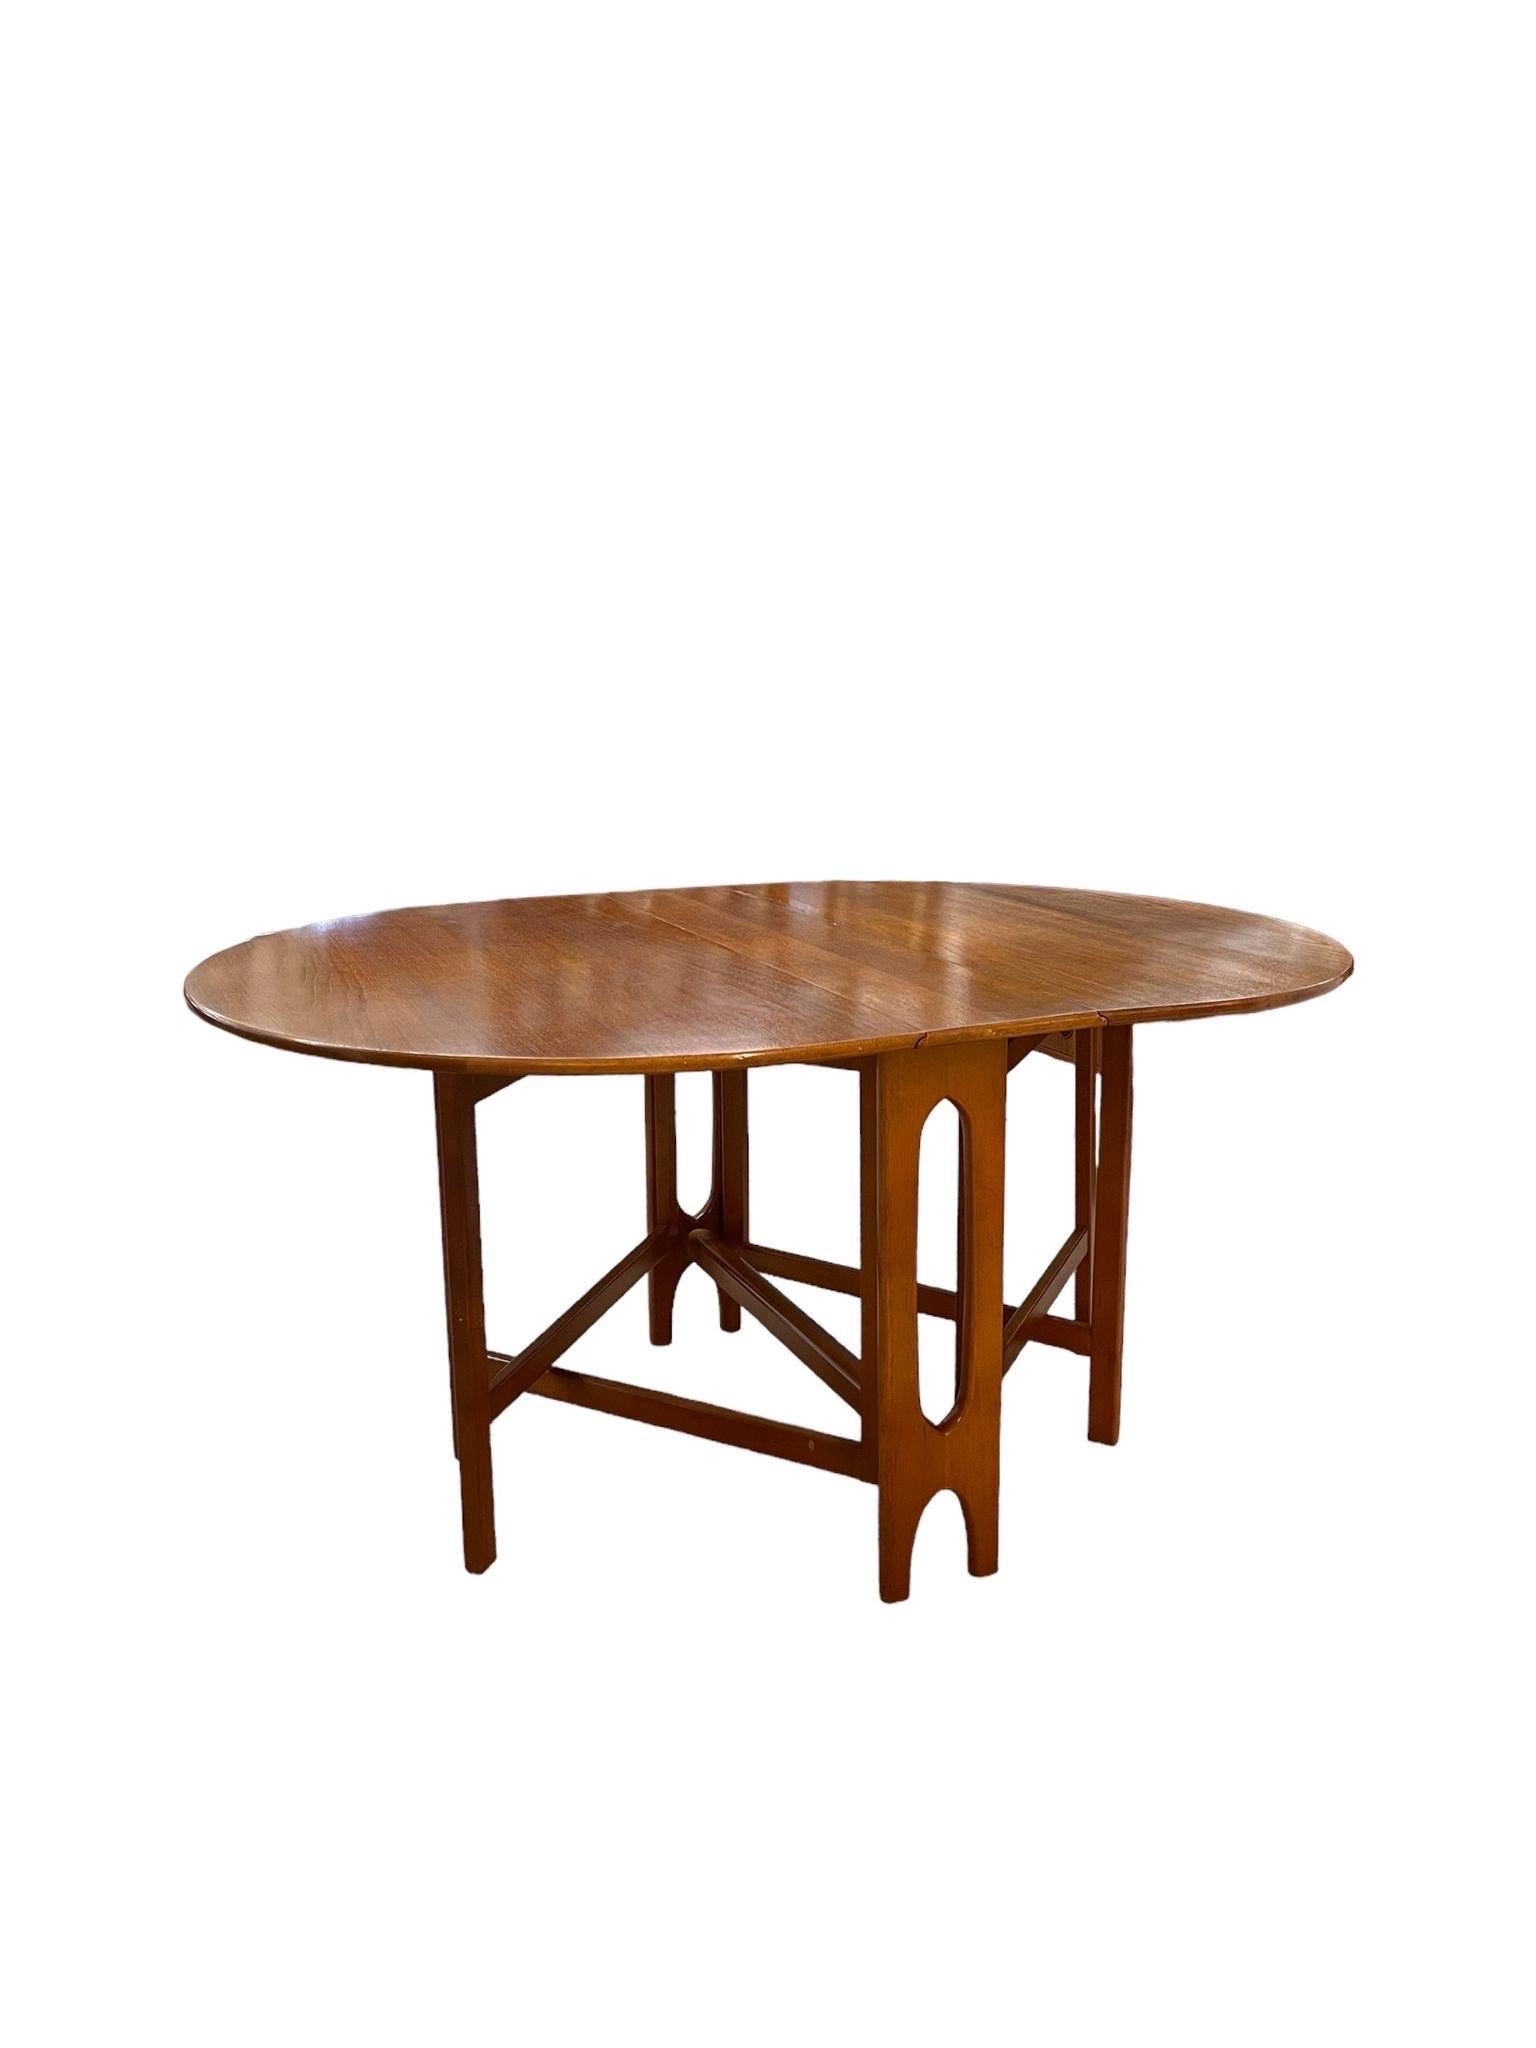 Vintage Folding Dining Table . Possibly Teak. Danish Modern Style. The Legs Interlock Under the Table for Stability. Vintage Condition Consistent with Age as Pictured.

Dimensions. 60 W ; 42 D ; 29 H